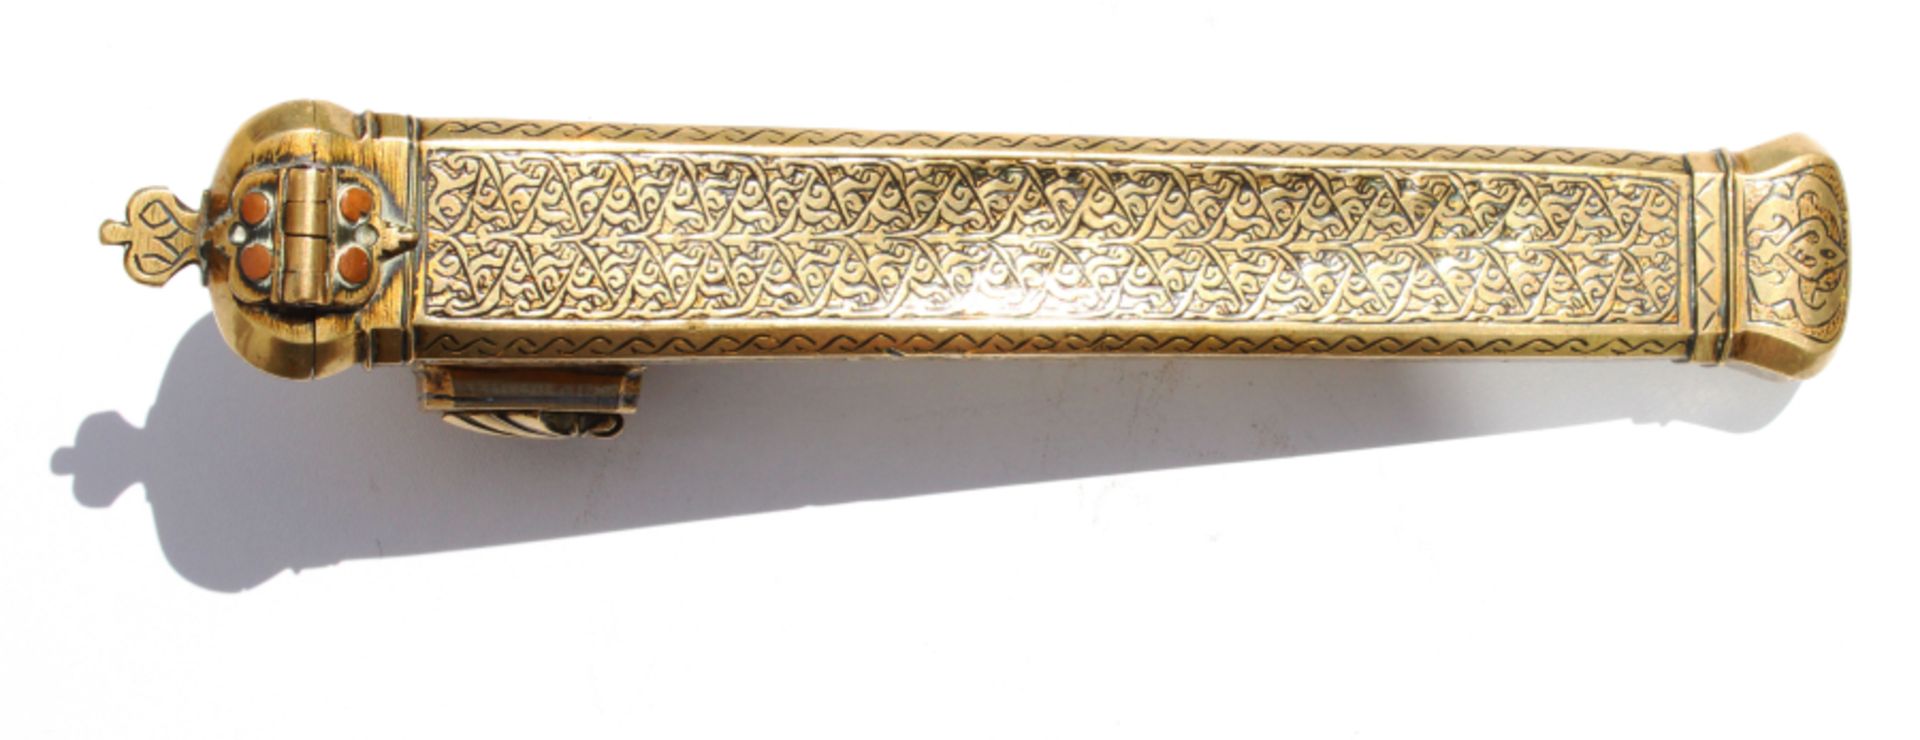 Ottoman brass pen case with inkwell - Image 10 of 12